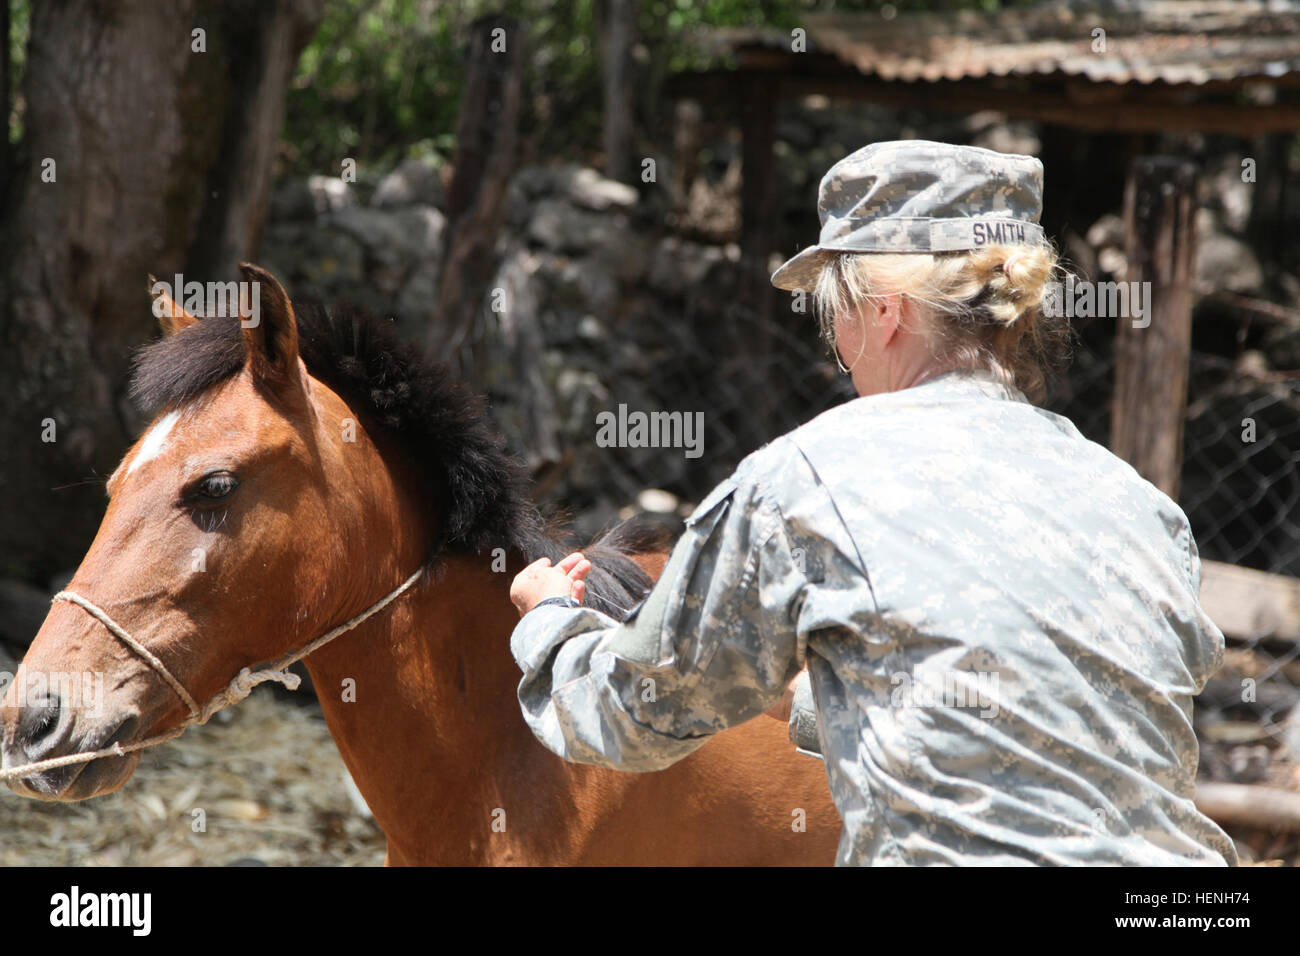 U.S. Army Maj. Victoria Smith, of the 149th Medical Detachment Veterinary Services, vaccinates a horse for a Veterinary Readiness Training Exercise during Beyond the Horizon, San Jose, Guatemala, May 25, 2015. Beyond the Horizon is an annual exercise that embraces the partnership between the United States and Guatemala, to provide focused humanitarian assistance through various medical, dental, and civic action programs. (U.S. Army photo by Pfc. Christopher Martin/Released) Beyond the Horizon 2014, Guatemala 140525-A-GA303-061 Stock Photo